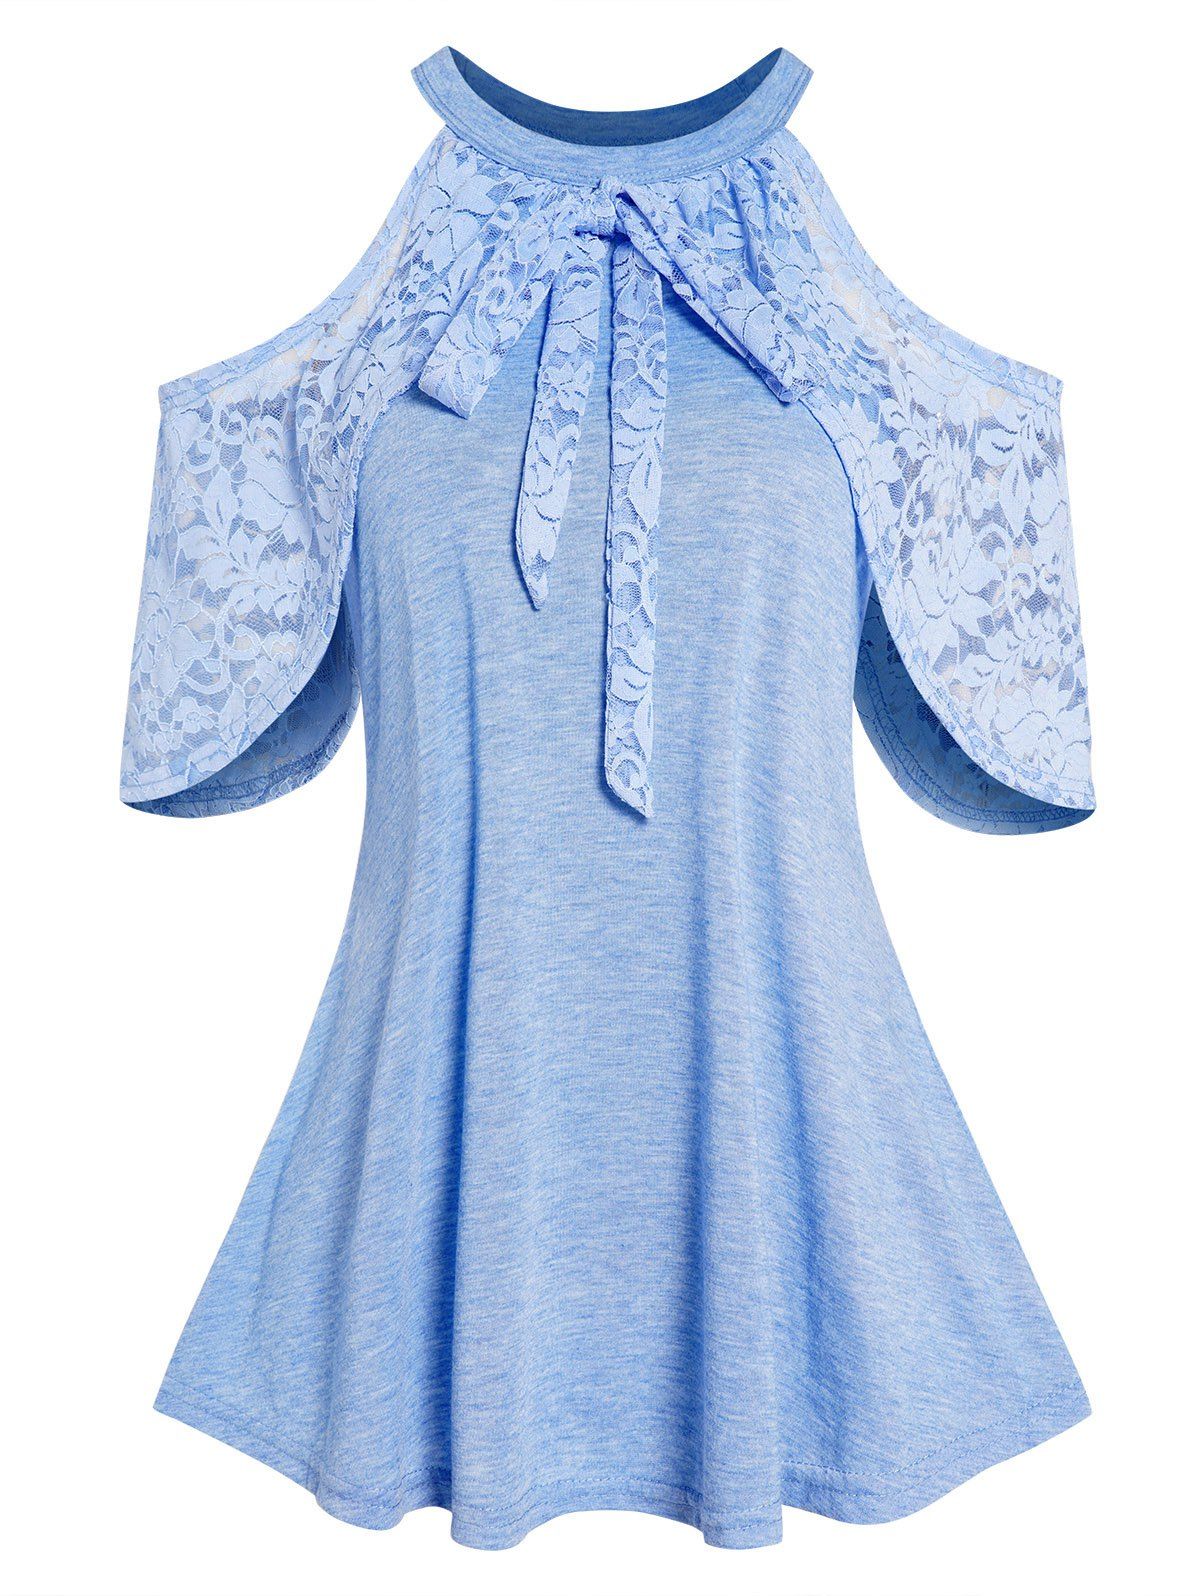 Cold Shoulder Lace Bowknot Top Short Sleeve Round Neck Casual Top - LIGHT BLUE M